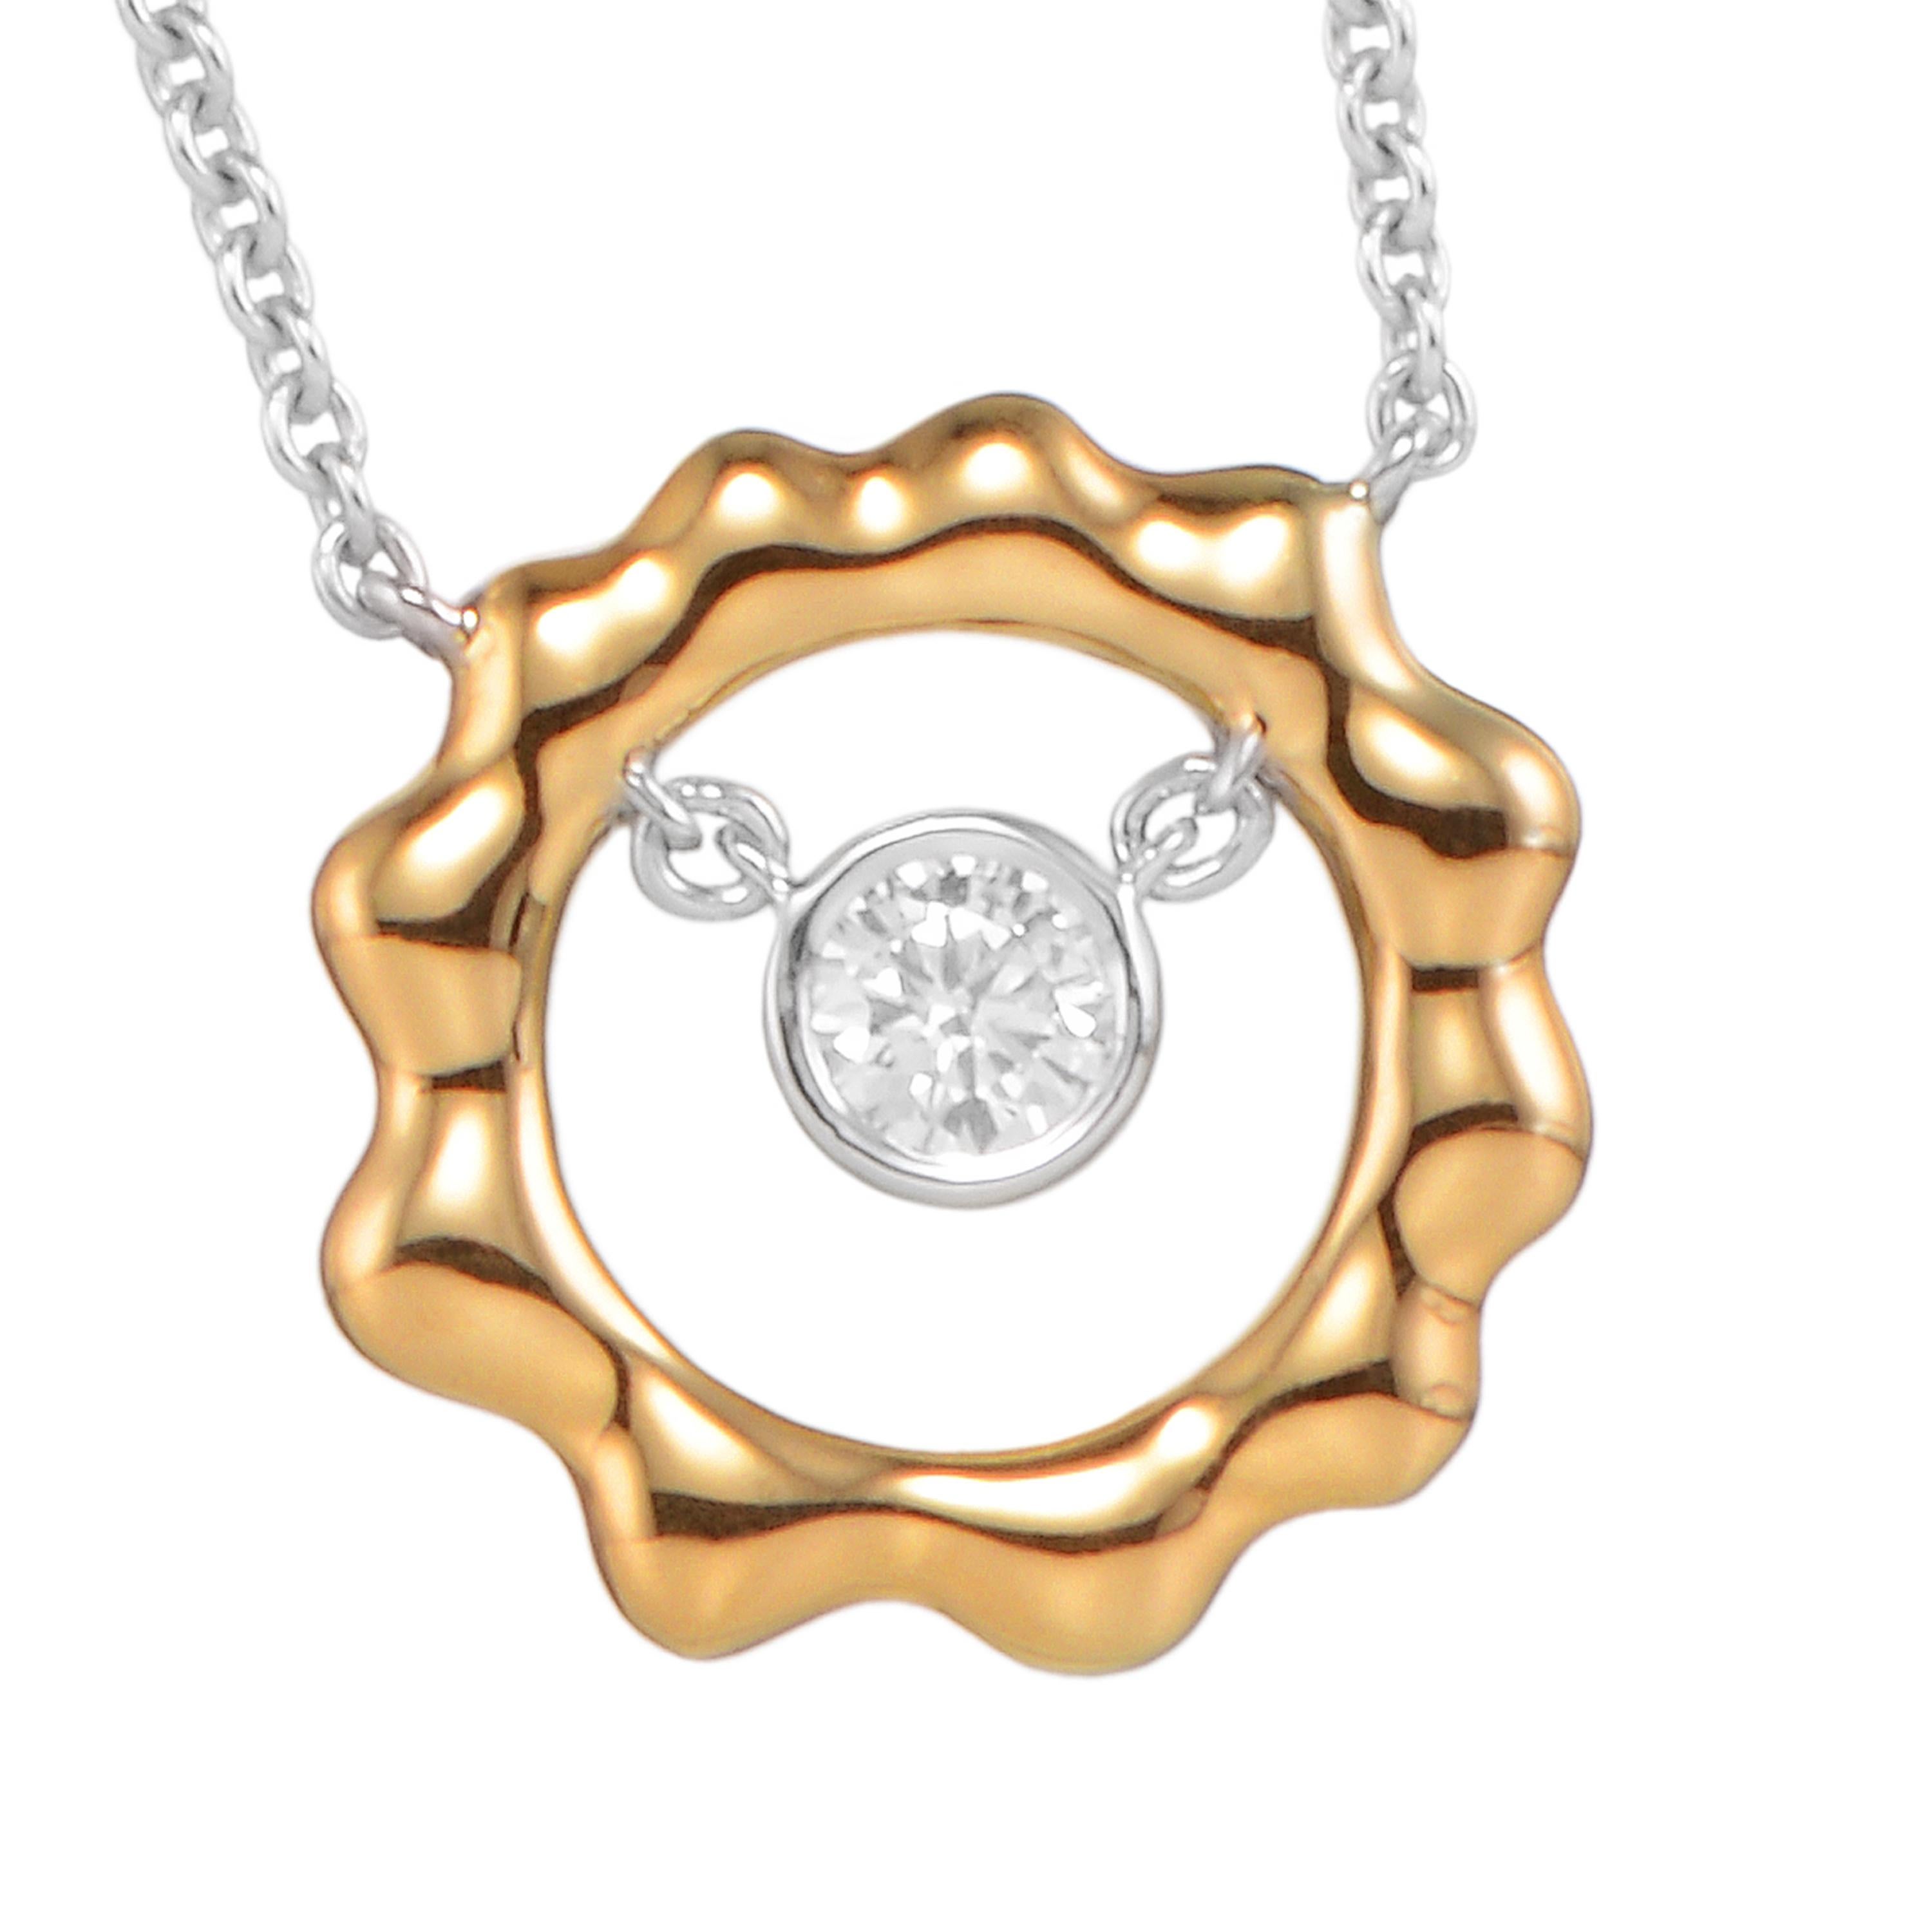 Cast in the shape of the sun, Butani's pendant necklace is handcrafted from 18-karat yellow and white gold and has a 0.28 carat brilliant-cut round diamond center illuminated by a yellow gold sun silhouette.  Wear it solo or layered with other